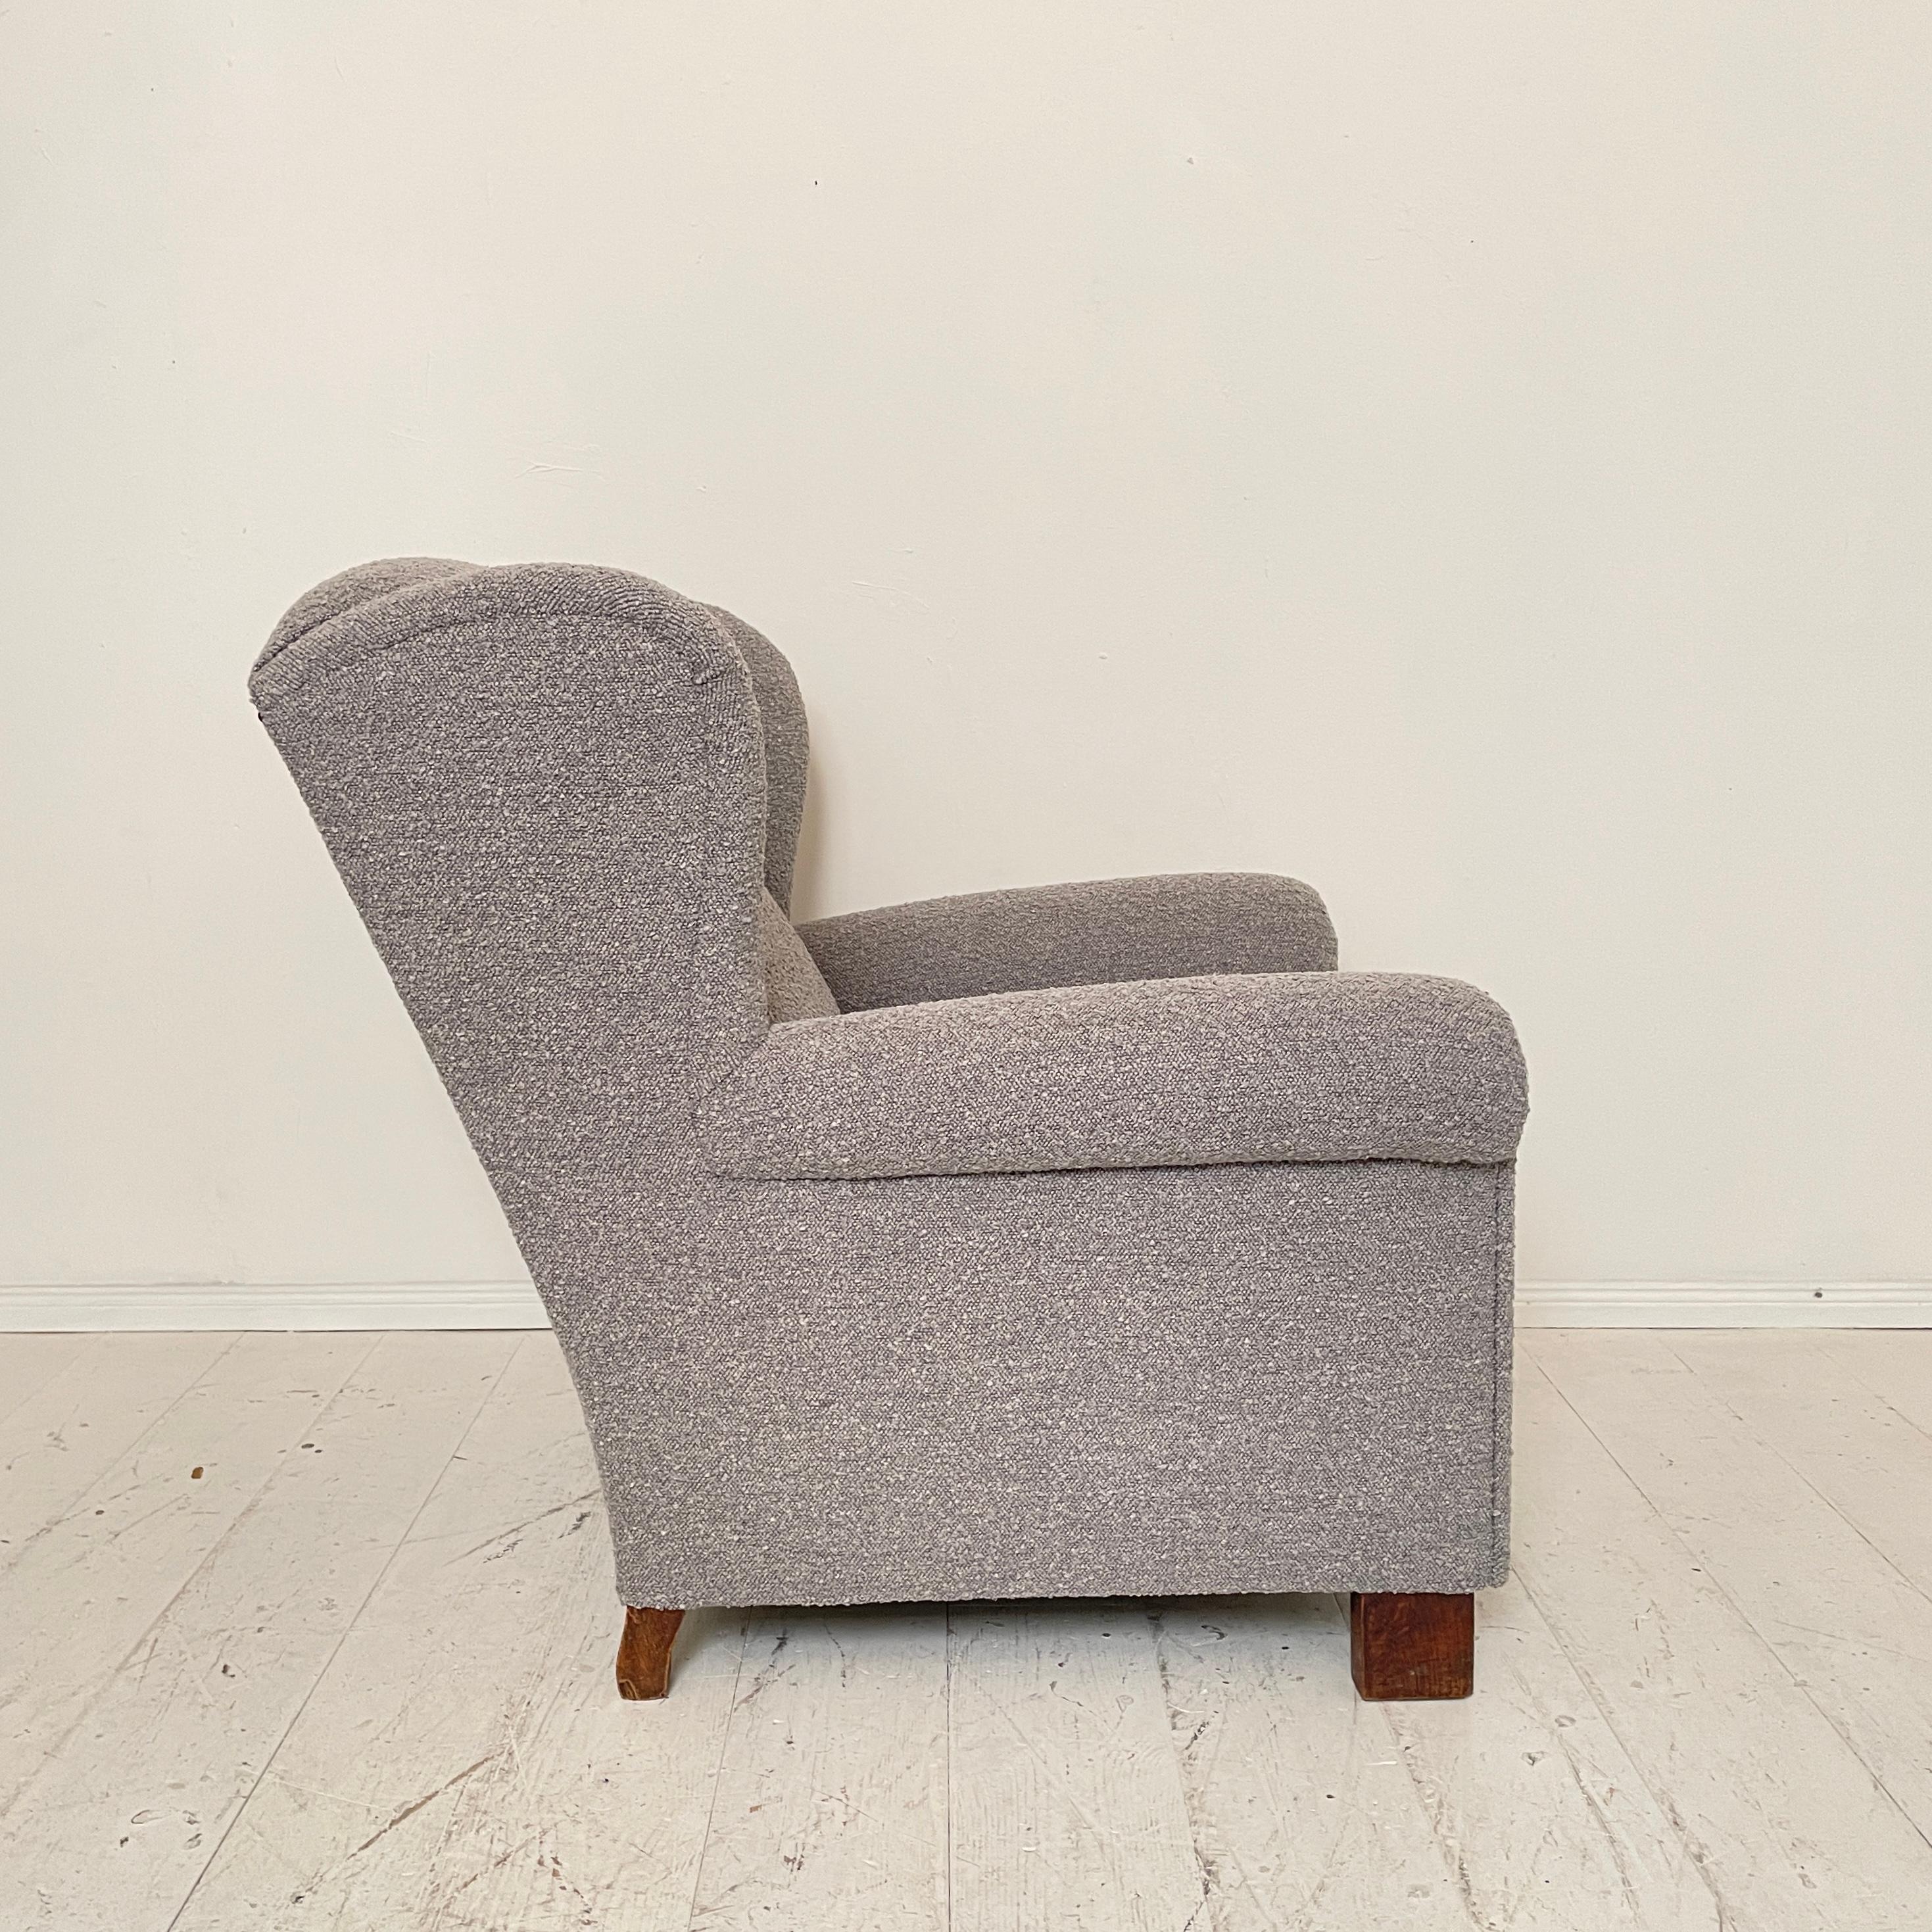 Bouclé German Art Deco Wingback Chair in Gray Boucle Fabric, 1925 For Sale